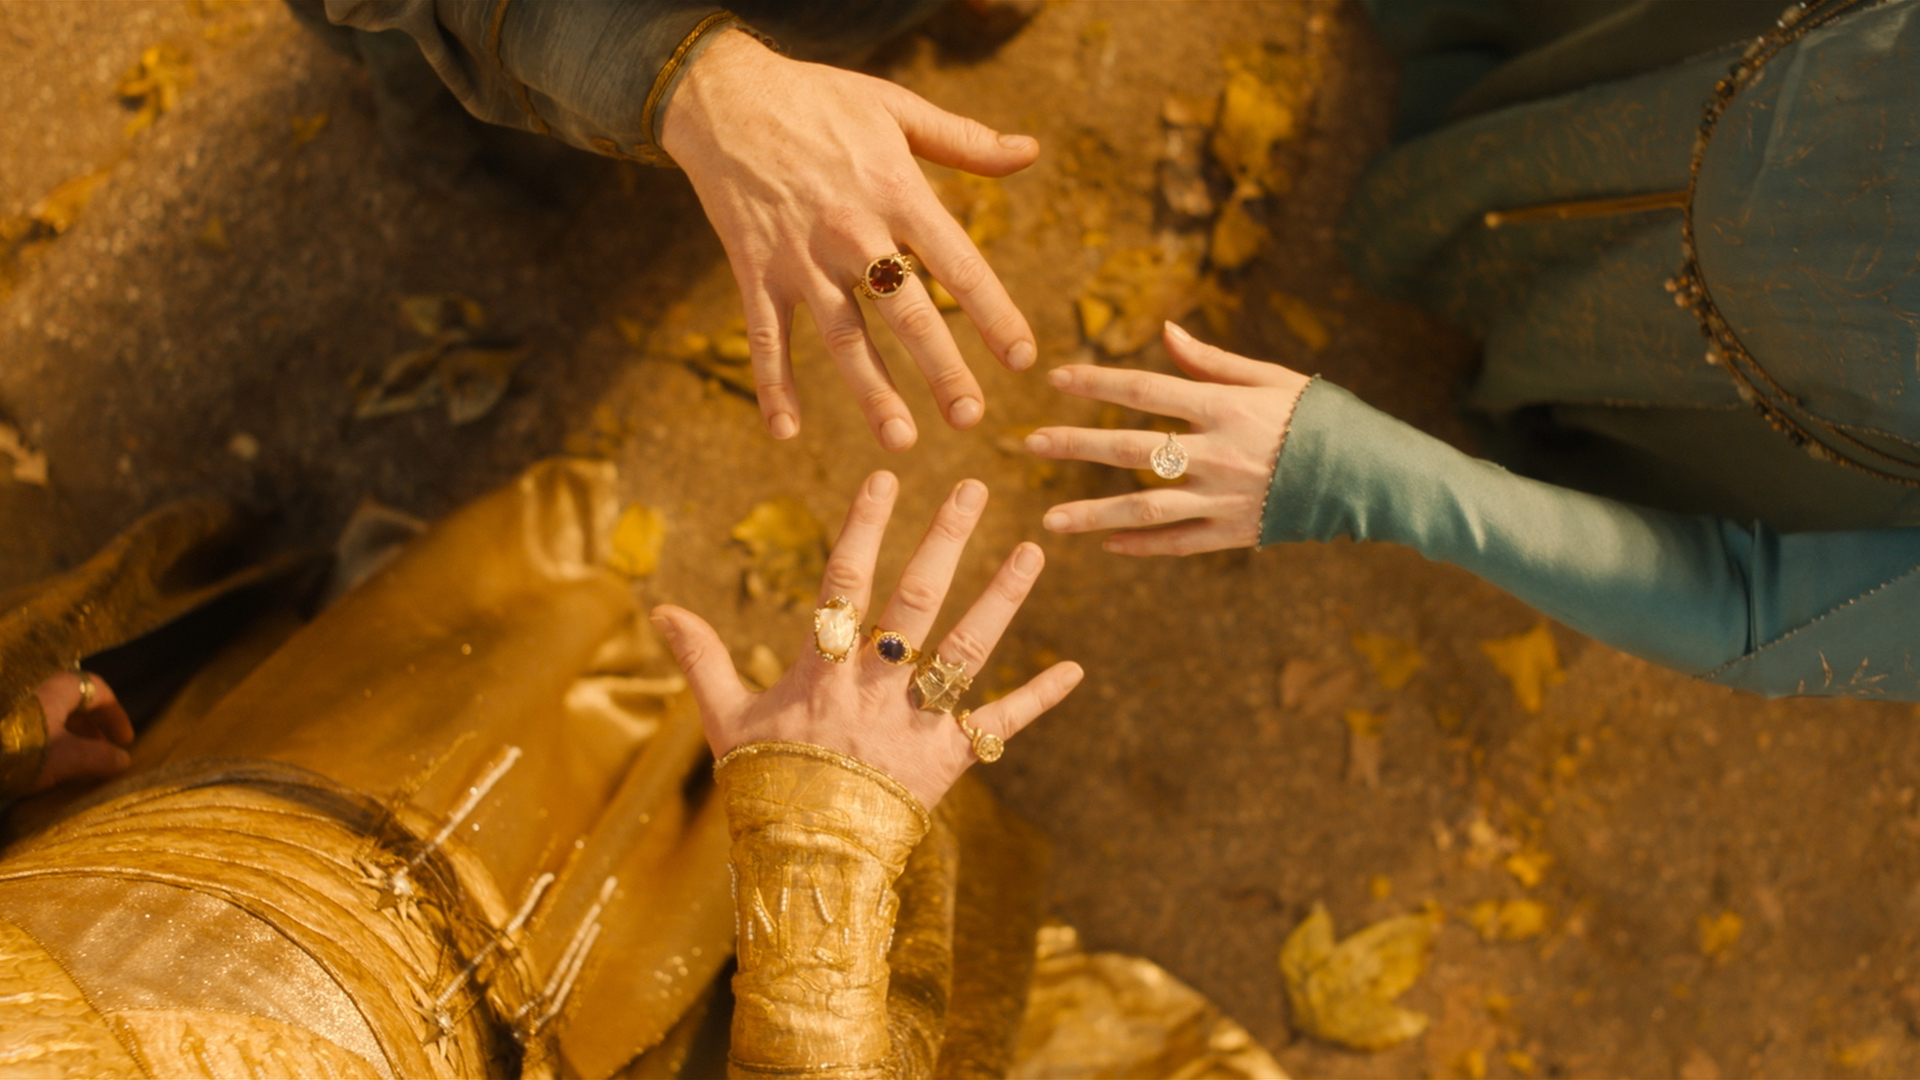 Gil-galad, Cirdan, and Galadriel show off the elven rings in The Rings of Power season 2